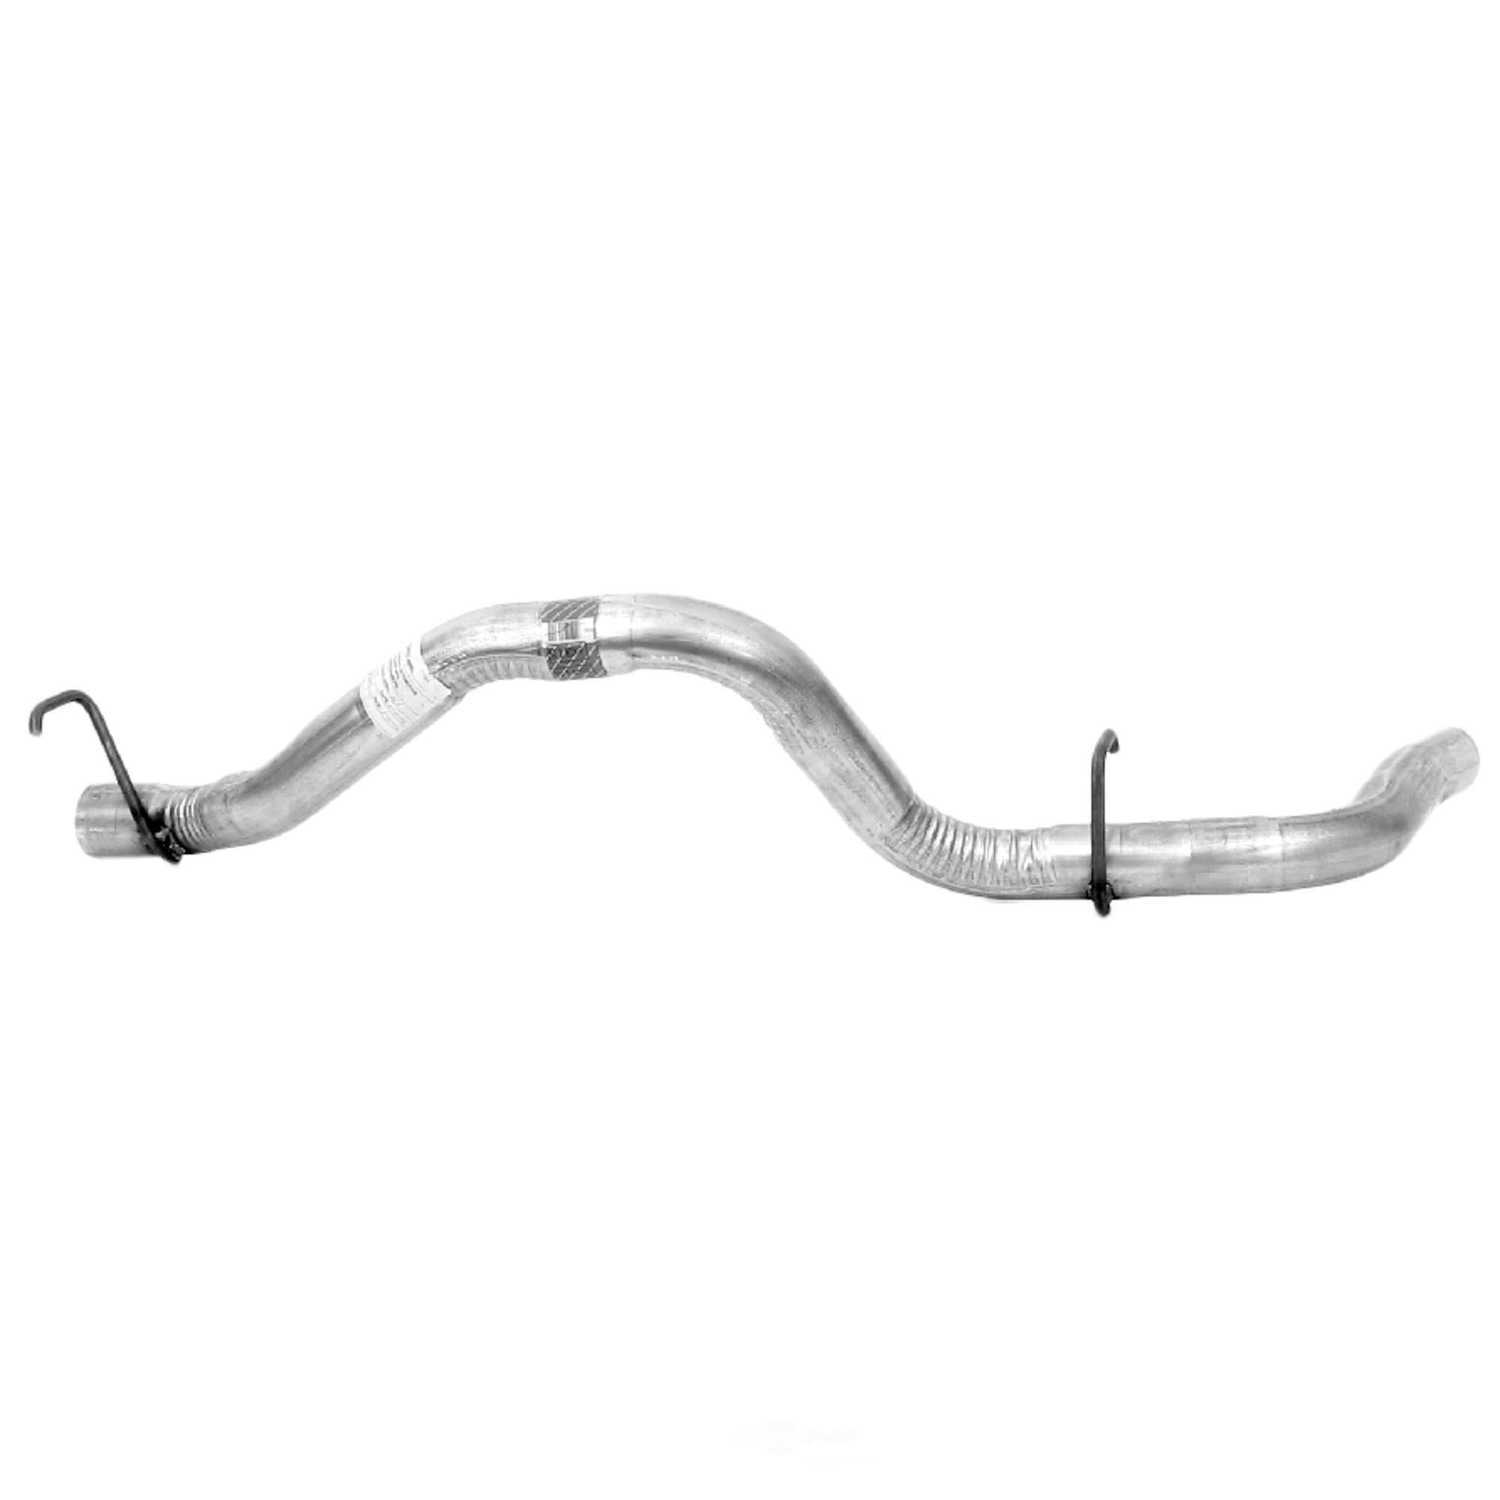 WALKER - Exhaust Tail Pipe - WAL 55315